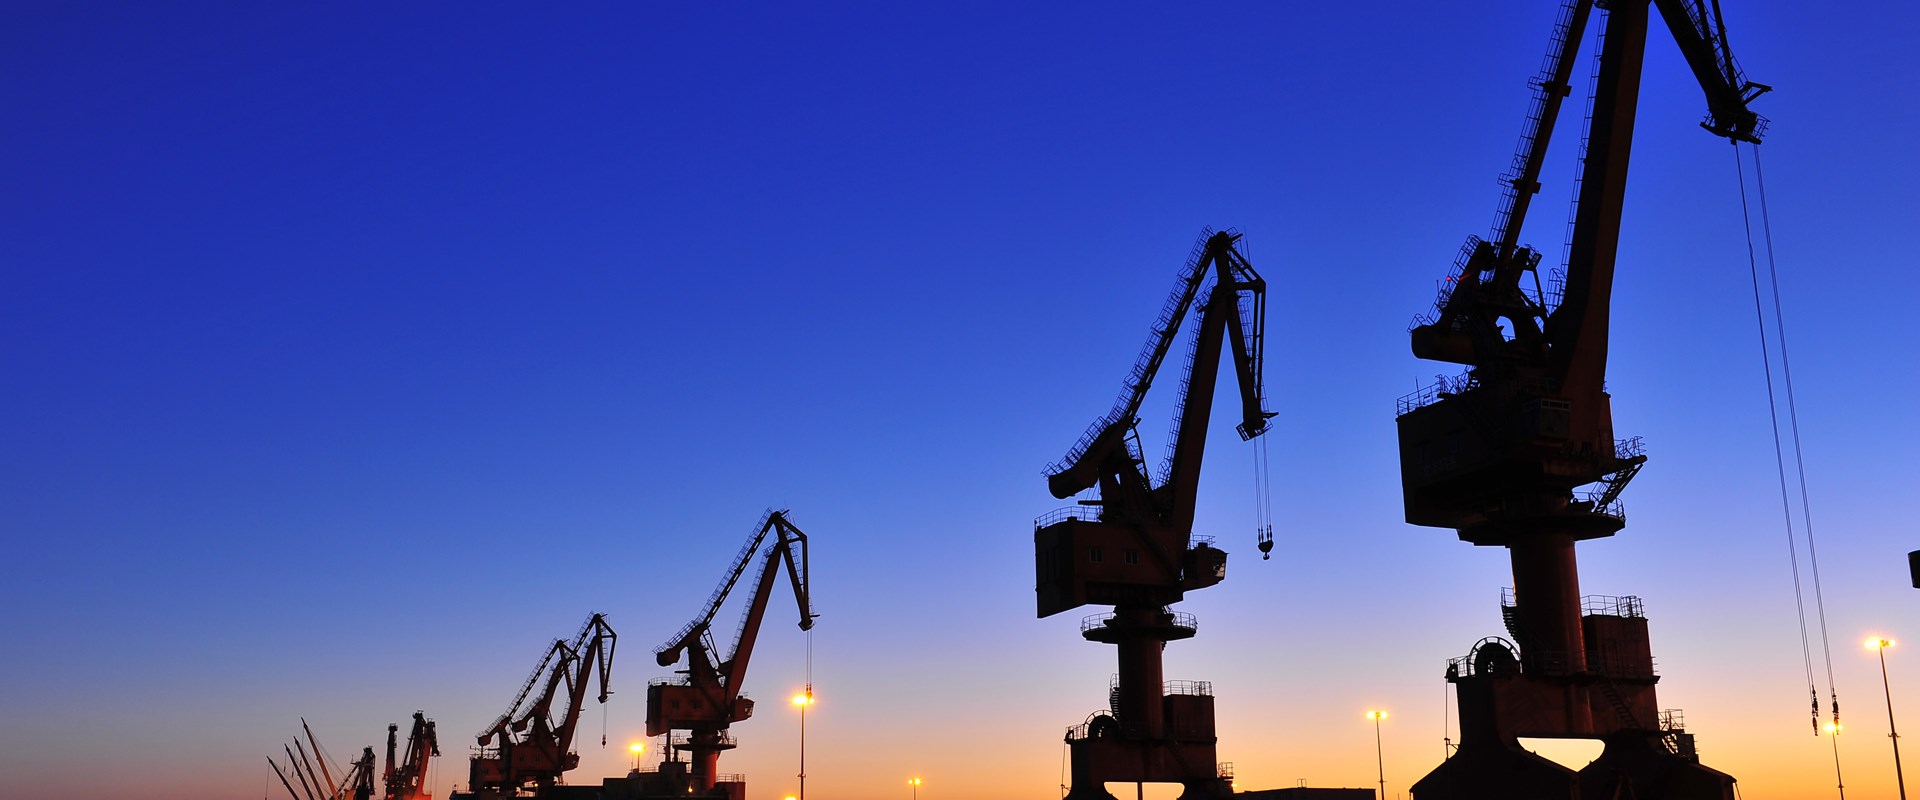 Picture of cranes against a night sky